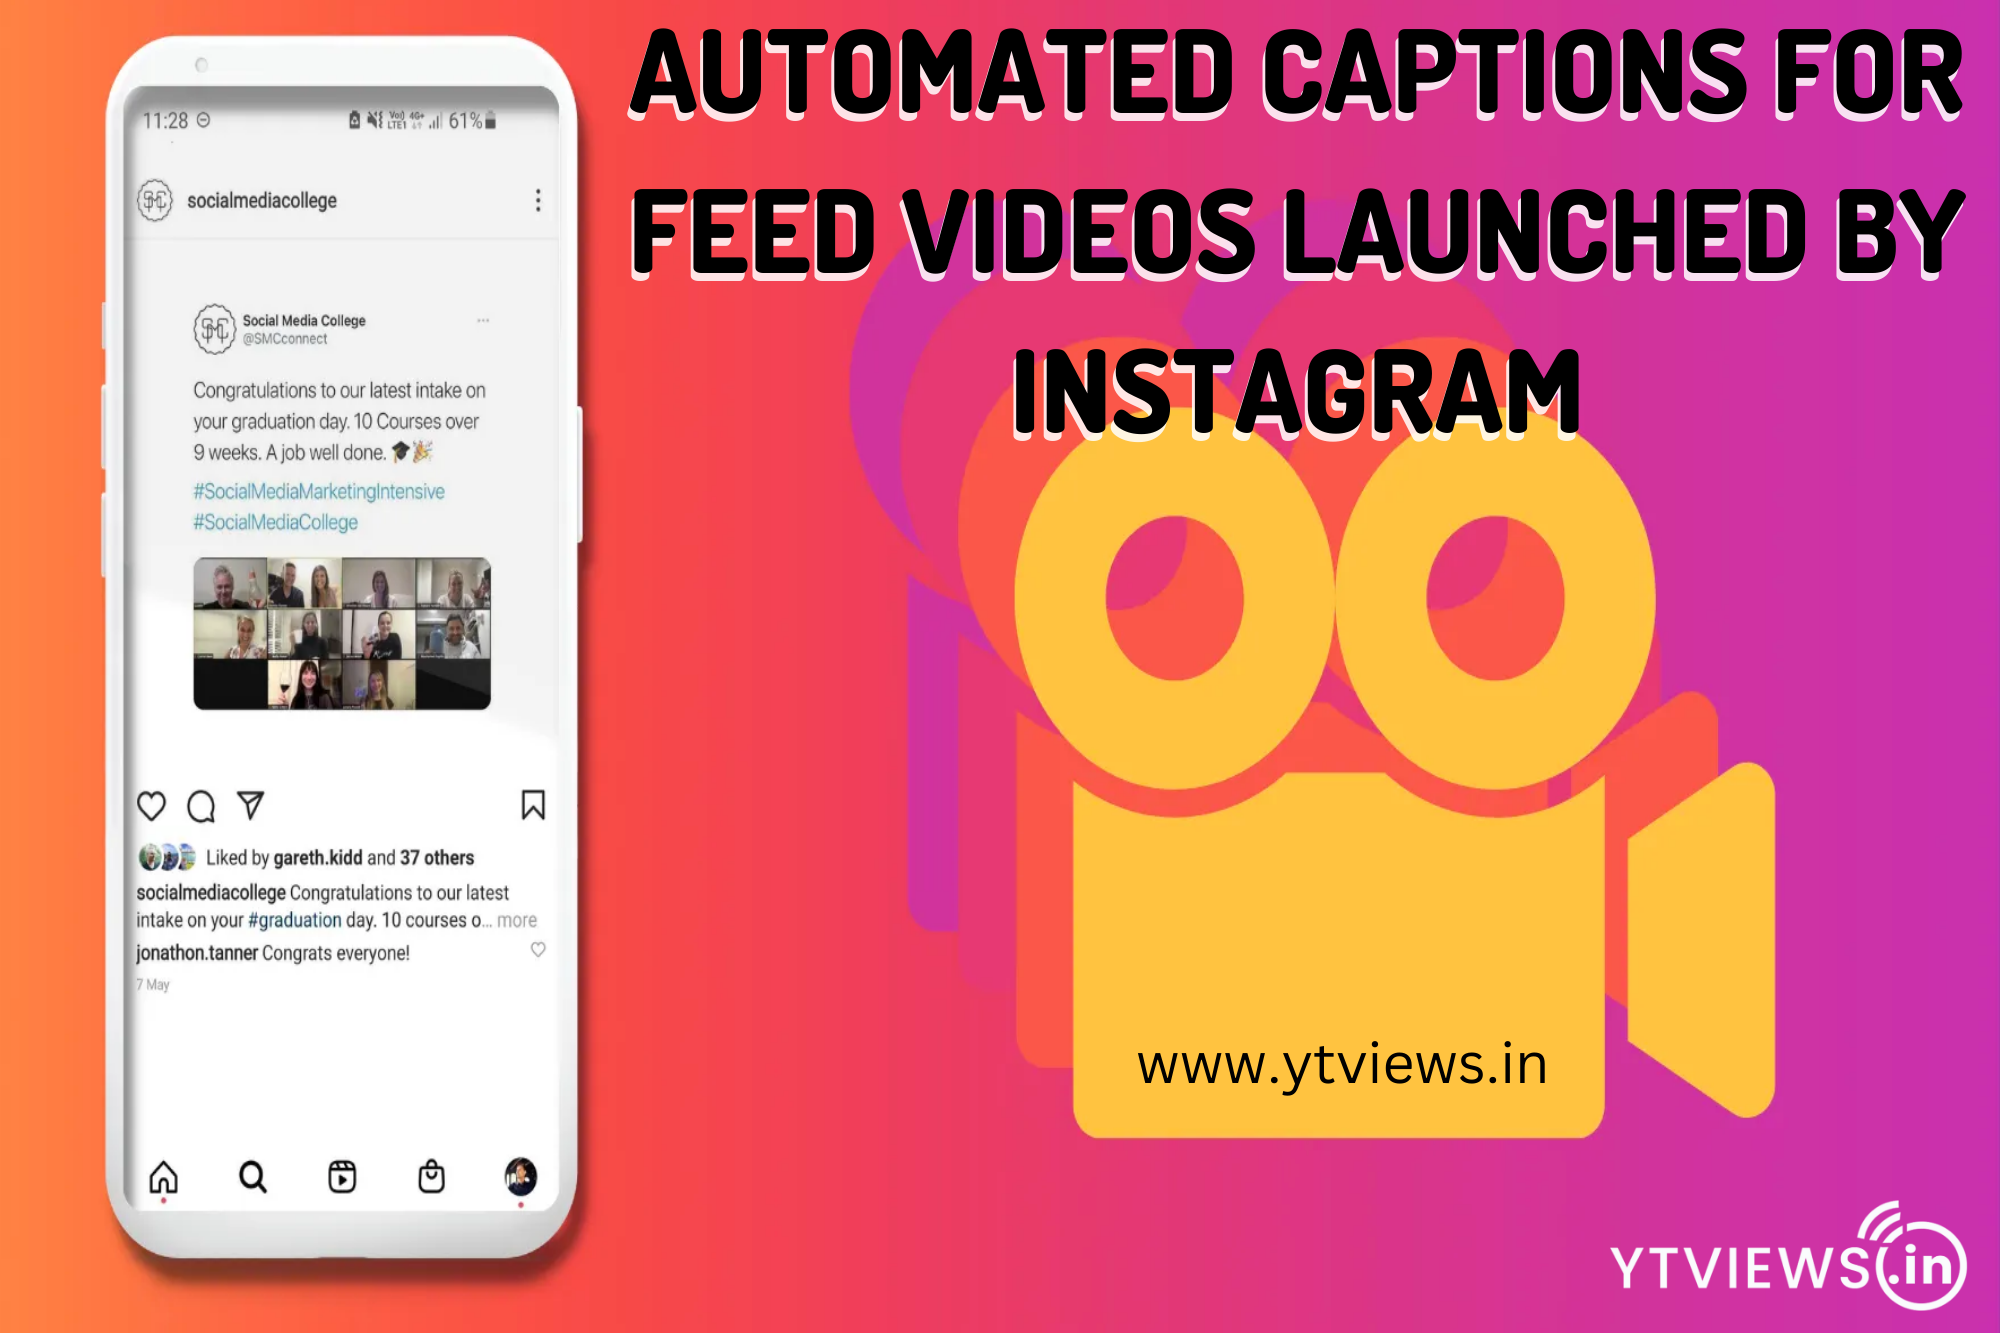 Automated captions for feed videos launched by Instagram